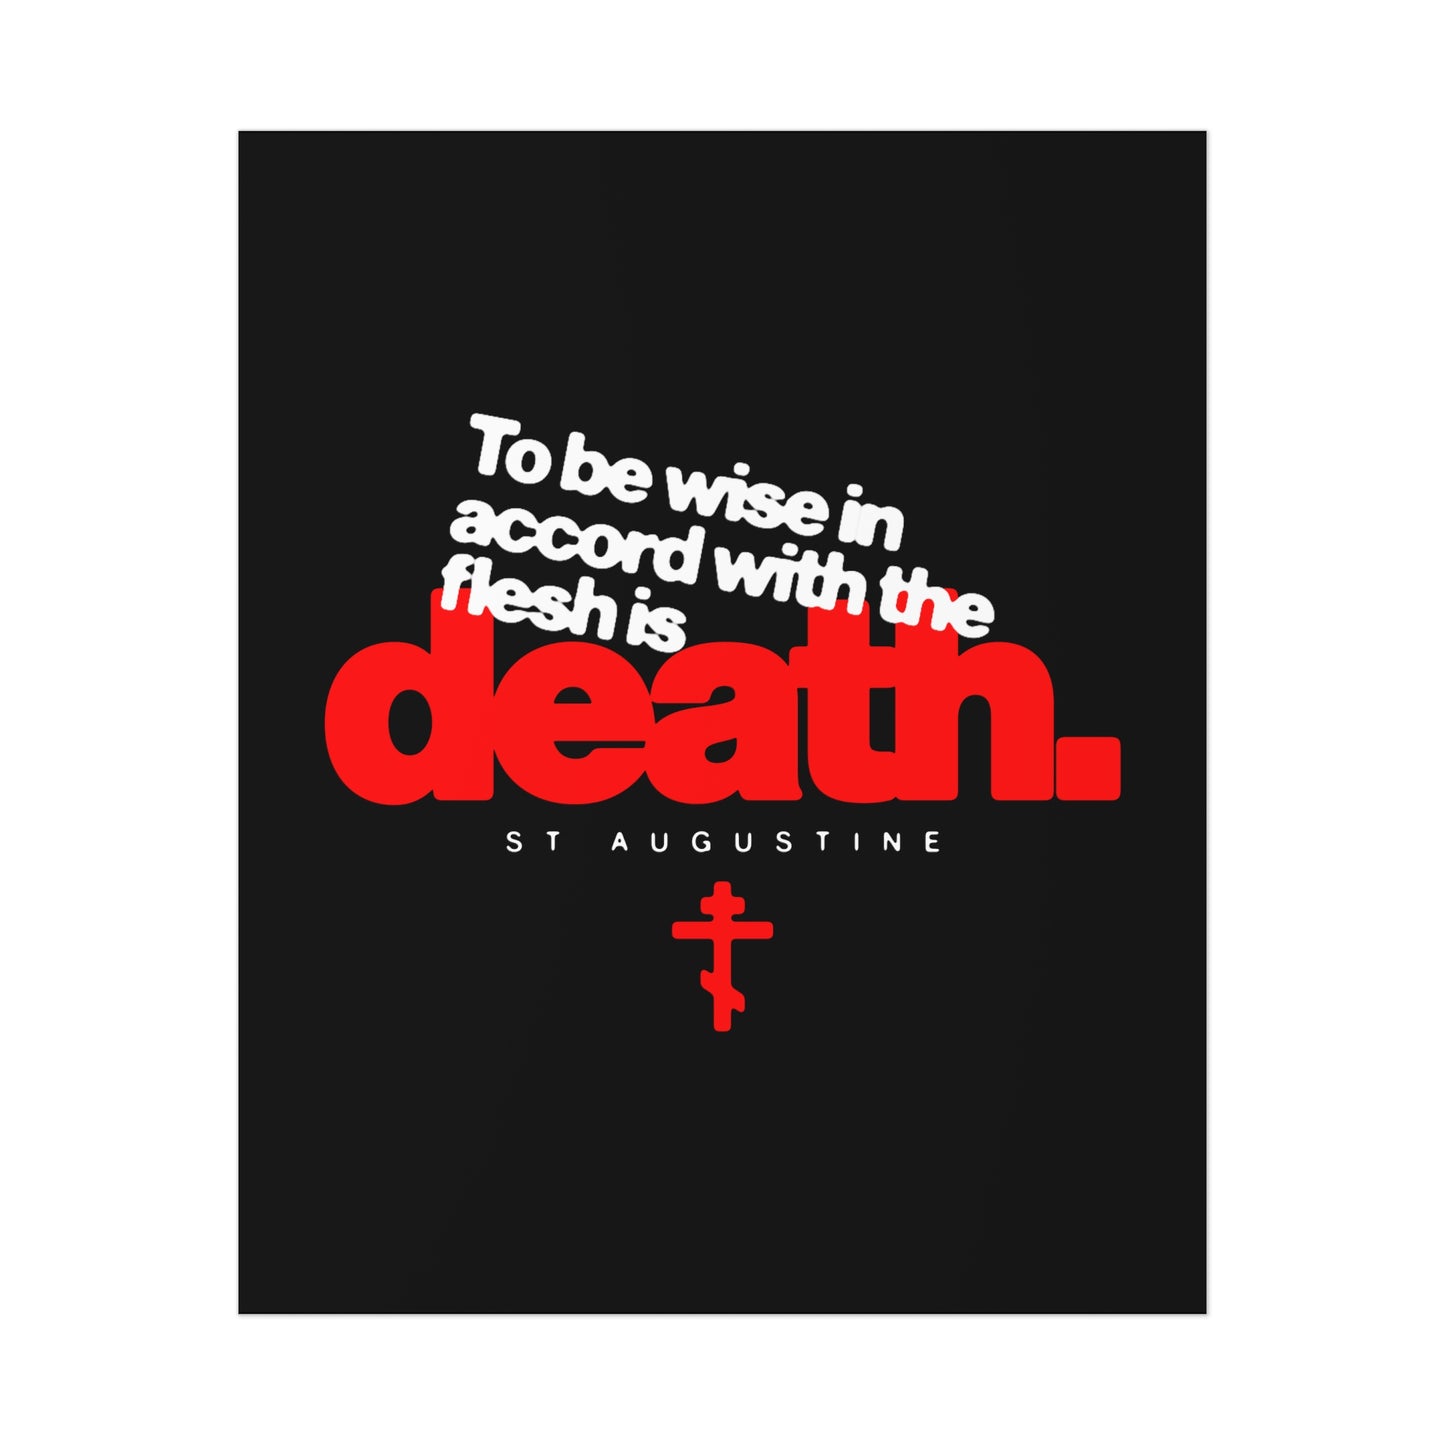 To Be Wise In Accord With the Flesh is Death (St Augustine) No. 1 | Orthodox Christian Art Poster